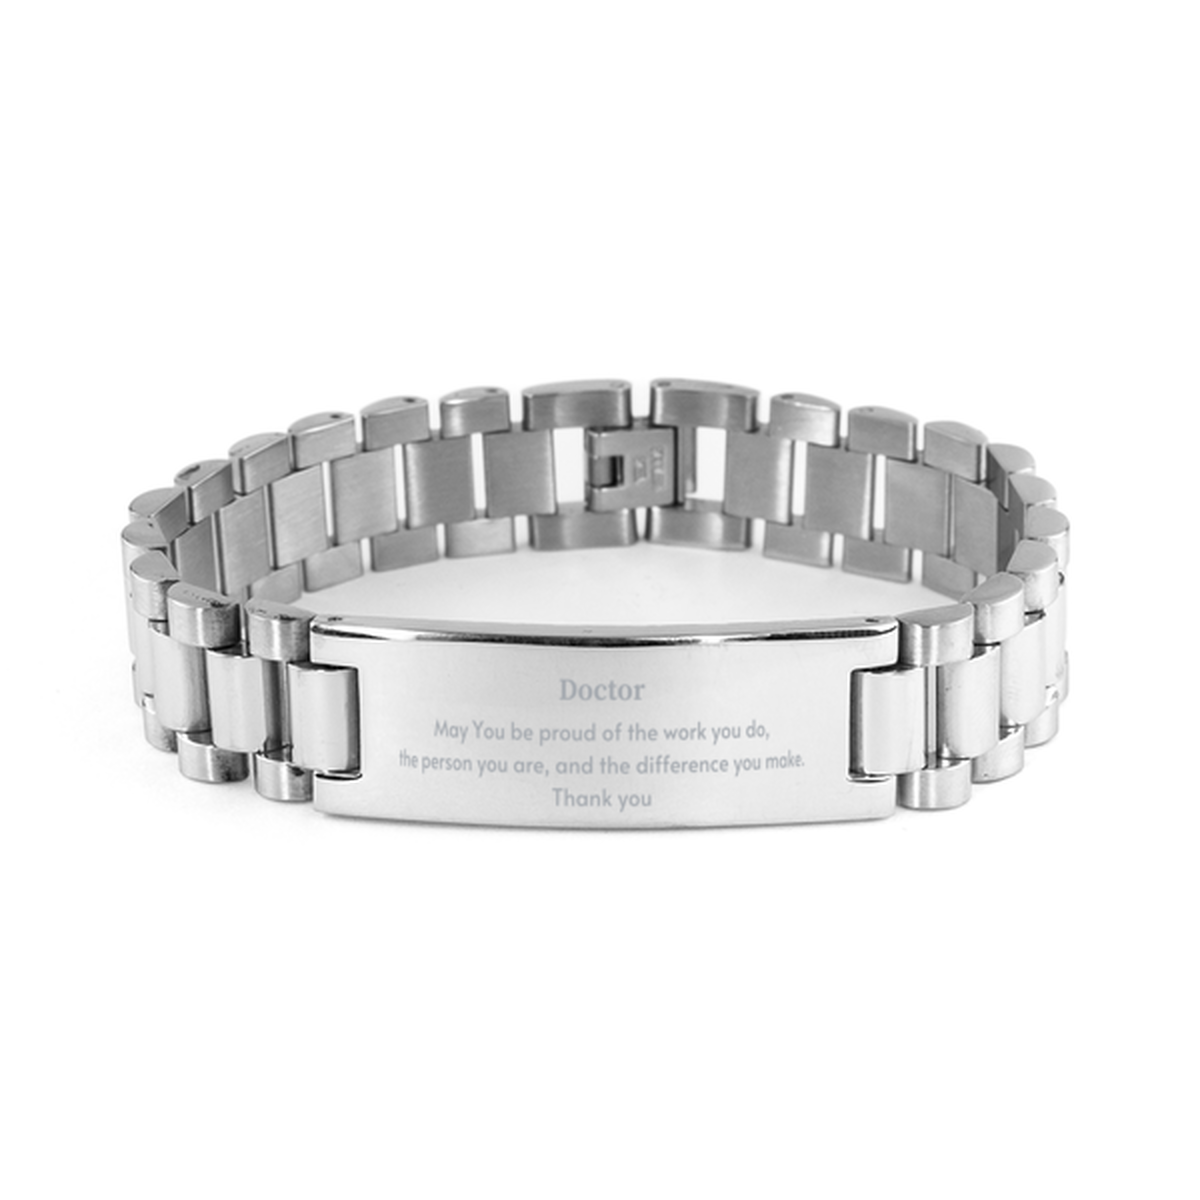 Heartwarming Ladder Stainless Steel Bracelet Retirement Coworkers Gifts for Doctor, Doctor May You be proud of the work you do, the person you are Gifts for Boss Men Women Friends